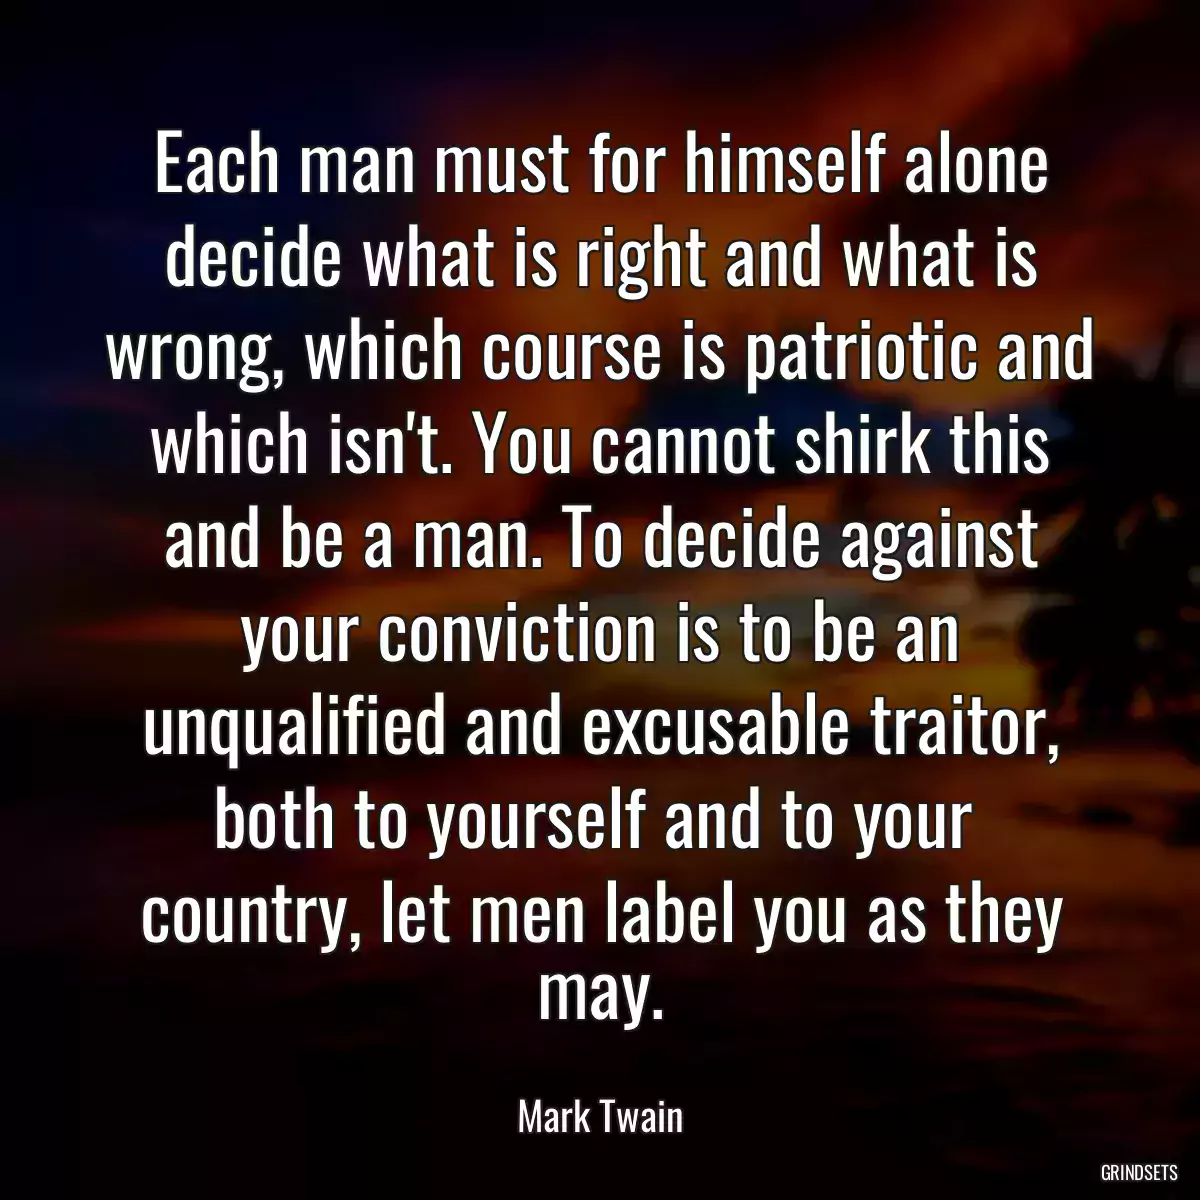 Each man must for himself alone decide what is right and what is wrong, which course is patriotic and which isn\'t. You cannot shirk this and be a man. To decide against your conviction is to be an unqualified and excusable traitor, both to yourself and to your 
country, let men label you as they may.